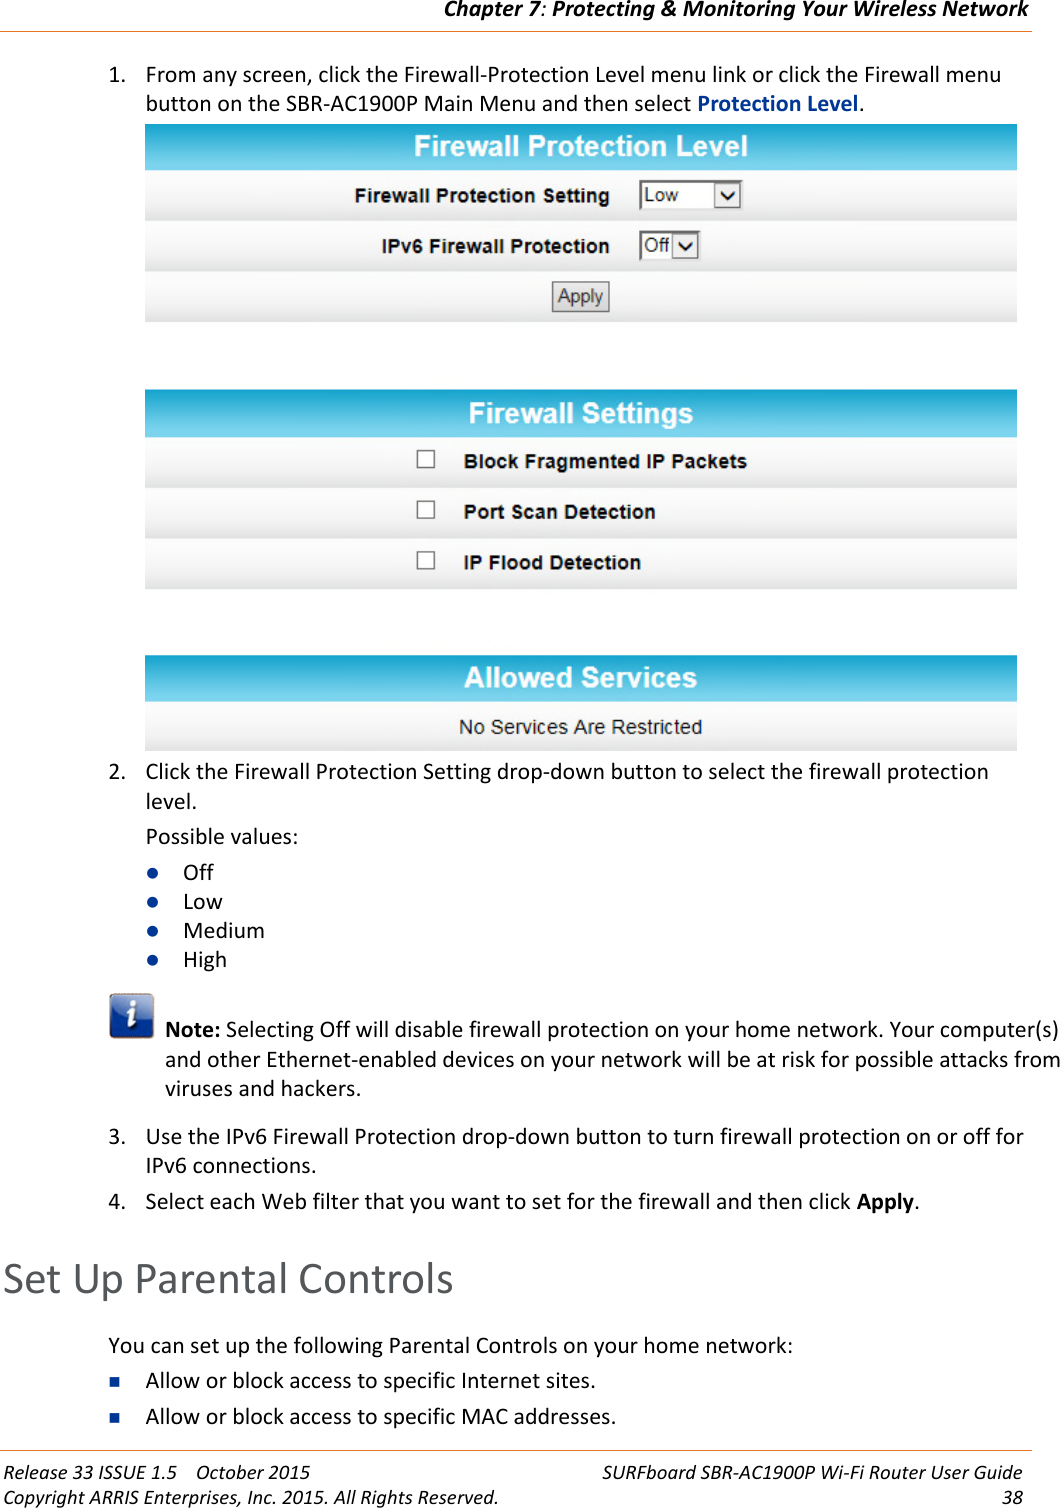 Chapter 7:Protecting &amp; Monitoring Your Wireless NetworkRelease 33 ISSUE 1.5 October 2015 SURFboard SBR-AC1900P Wi-Fi Router User GuideCopyright ARRIS Enterprises, Inc. 2015. All Rights Reserved. 381. From any screen, click the Firewall-Protection Level menu link or click the Firewall menubutton on the SBR-AC1900P Main Menu and then select Protection Level.2. Click the Firewall Protection Setting drop-down button to select the firewall protectionlevel.Possible values:OffLowMediumHighNote: Selecting Off will disable firewall protection on your home network. Your computer(s)and other Ethernet-enabled devices on your network will be at risk for possible attacks fromviruses and hackers.3. Use the IPv6 Firewall Protection drop-down button to turn firewall protection on or off forIPv6 connections.4. Select each Web filter that you want to set for the firewall and then click Apply.Set Up Parental ControlsYou can set up the following Parental Controls on your home network:Allow or block access to specific Internet sites.Allow or block access to specific MAC addresses.